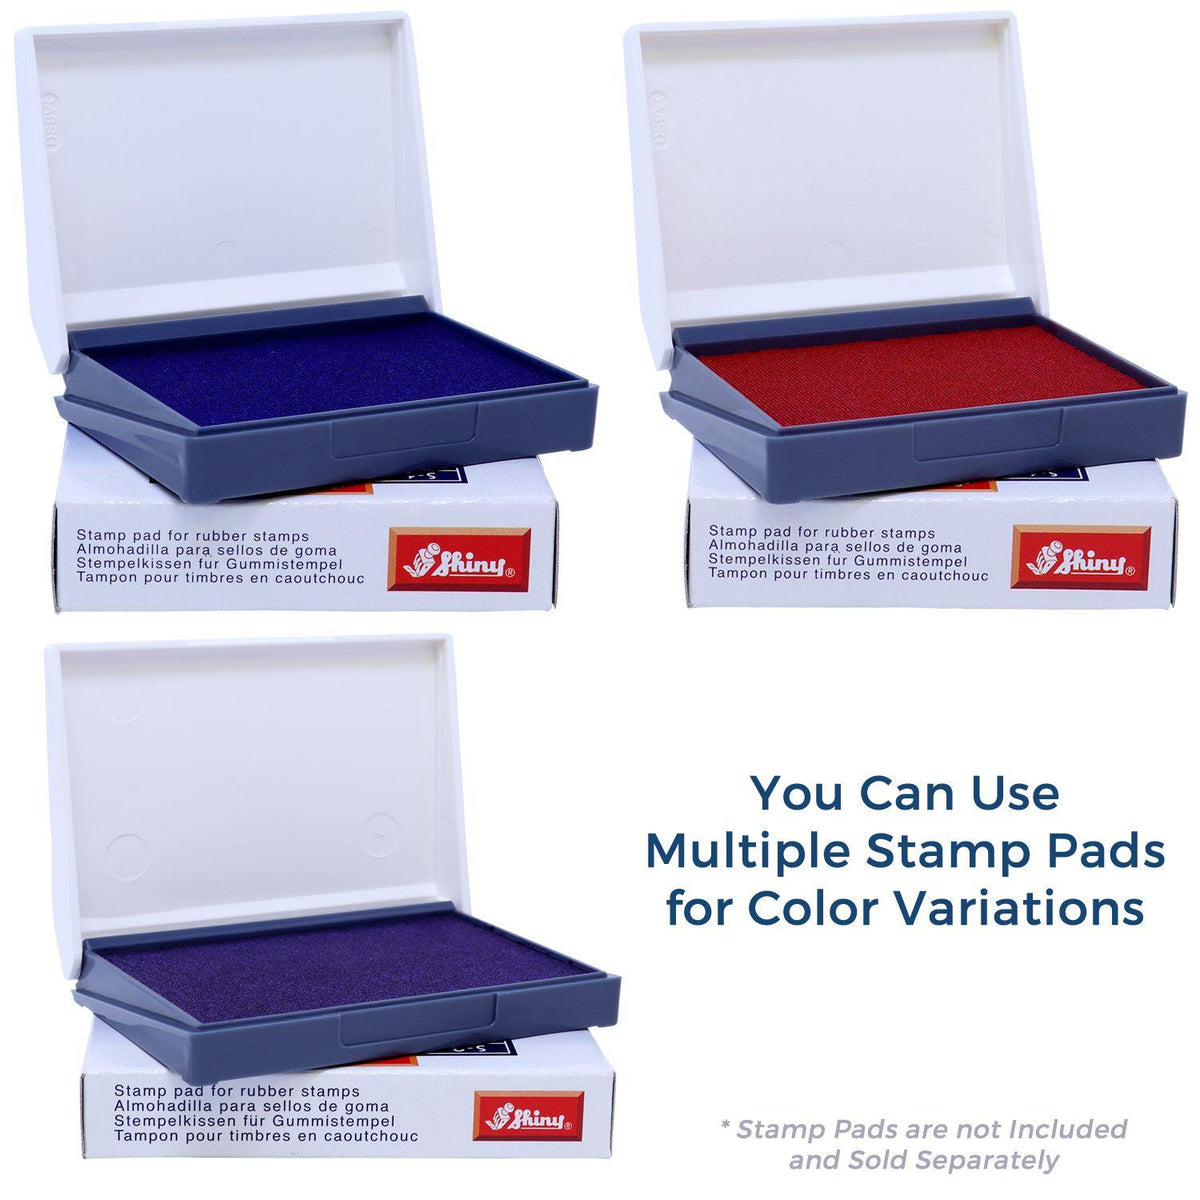 Stamp Pads for Large Received in Damaged Condition Rubber Stamp Available